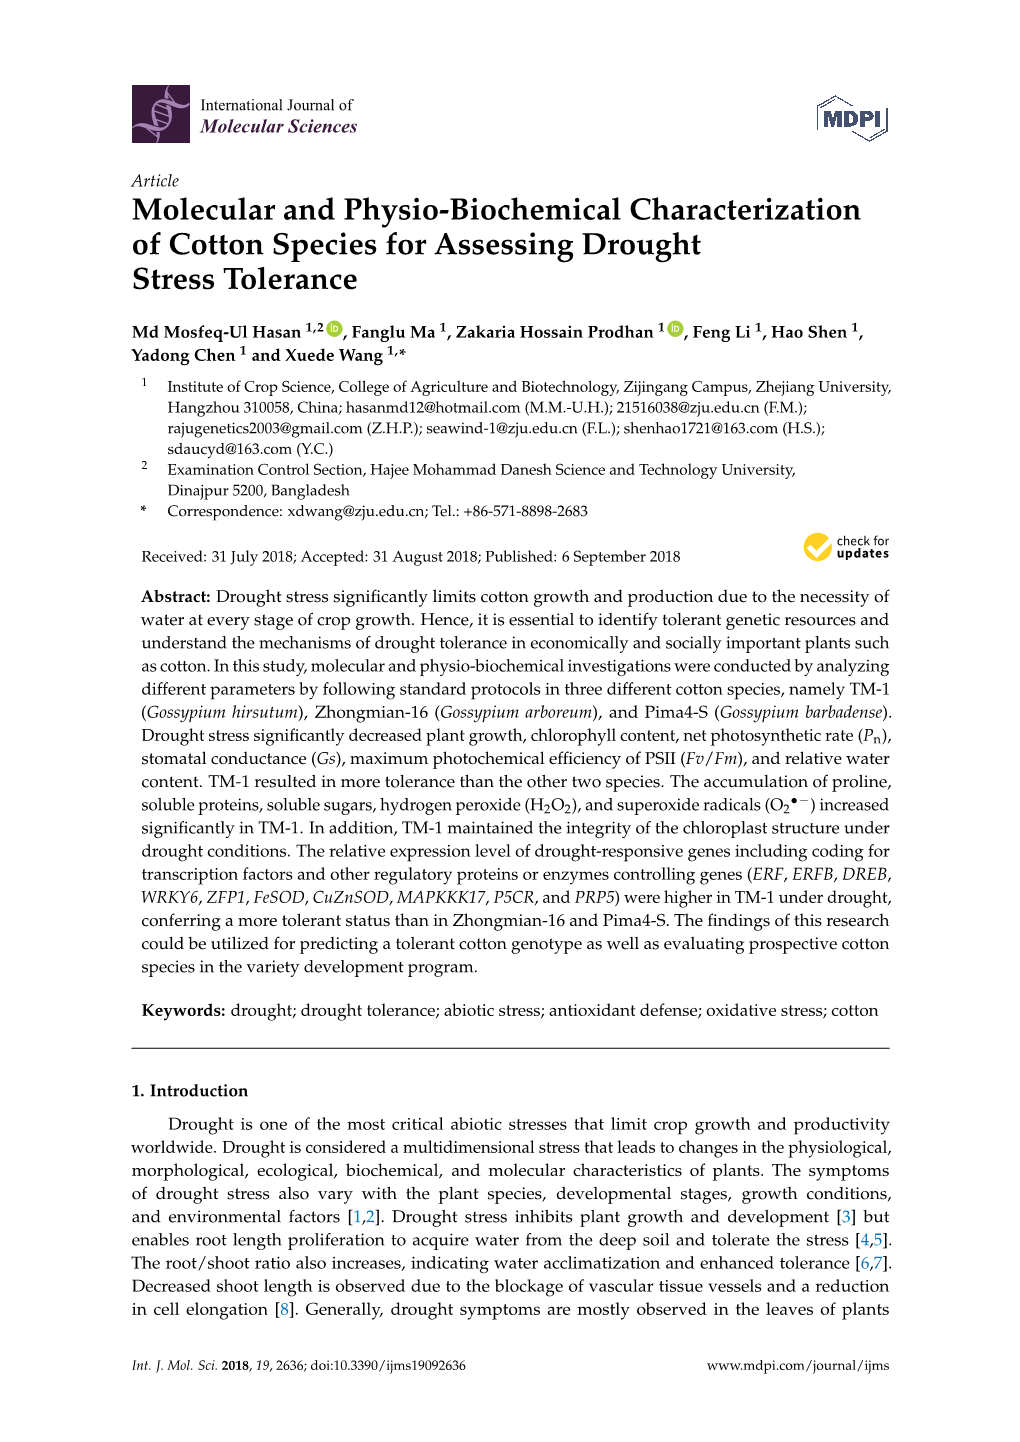 Molecular and Physio-Biochemical Characterization of Cotton Species for Assessing Drought Stress Tolerance